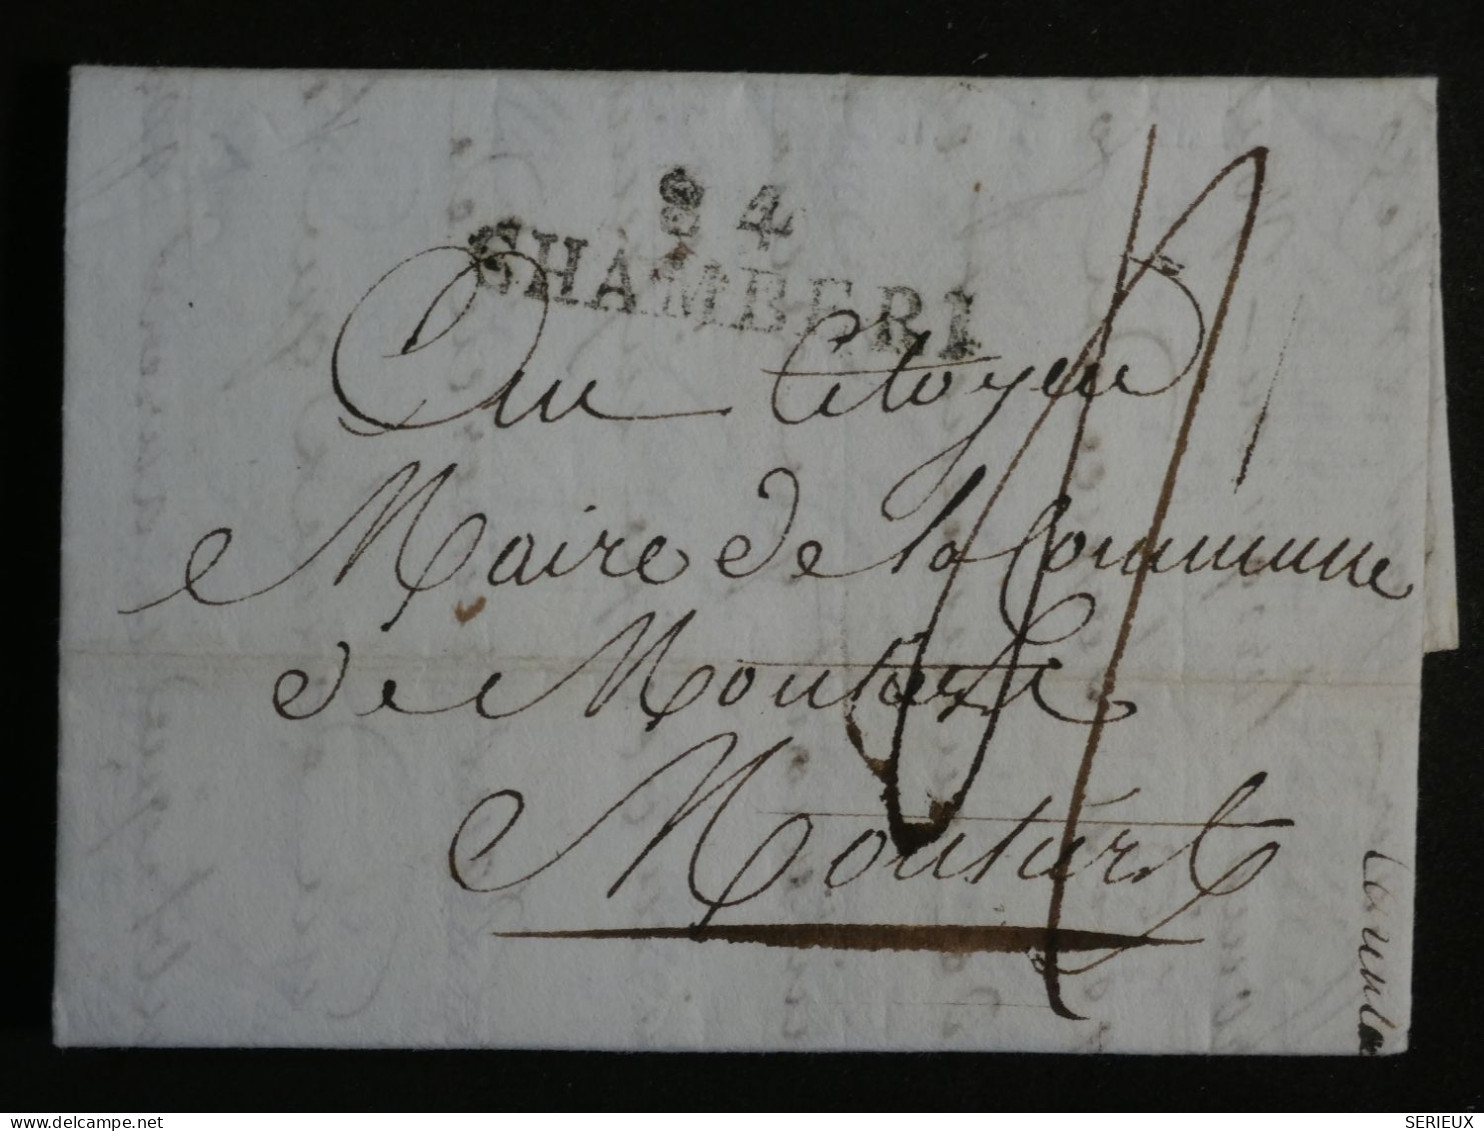 DN16   FRANCE   LETTRE 1792   CHAMBERI A   MOUSTIERS  +AFF. INTERESSANT +++ - 1701-1800: Vorläufer XVIII